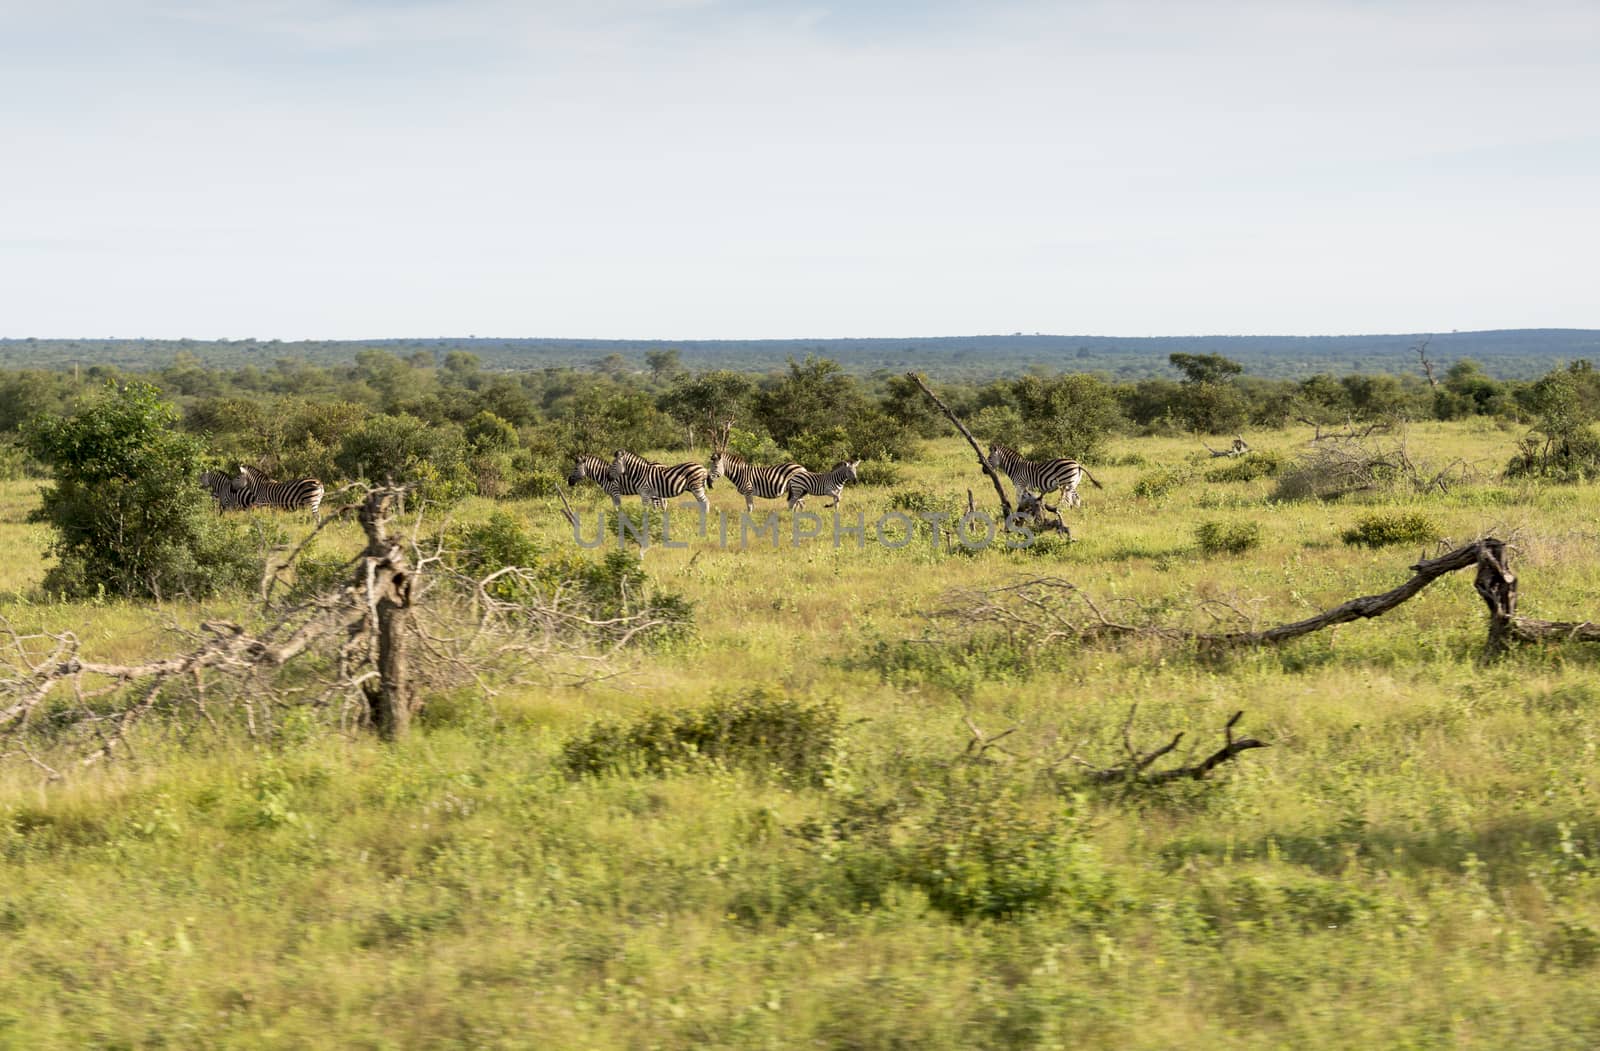 zebras in the kruger national reserve by compuinfoto